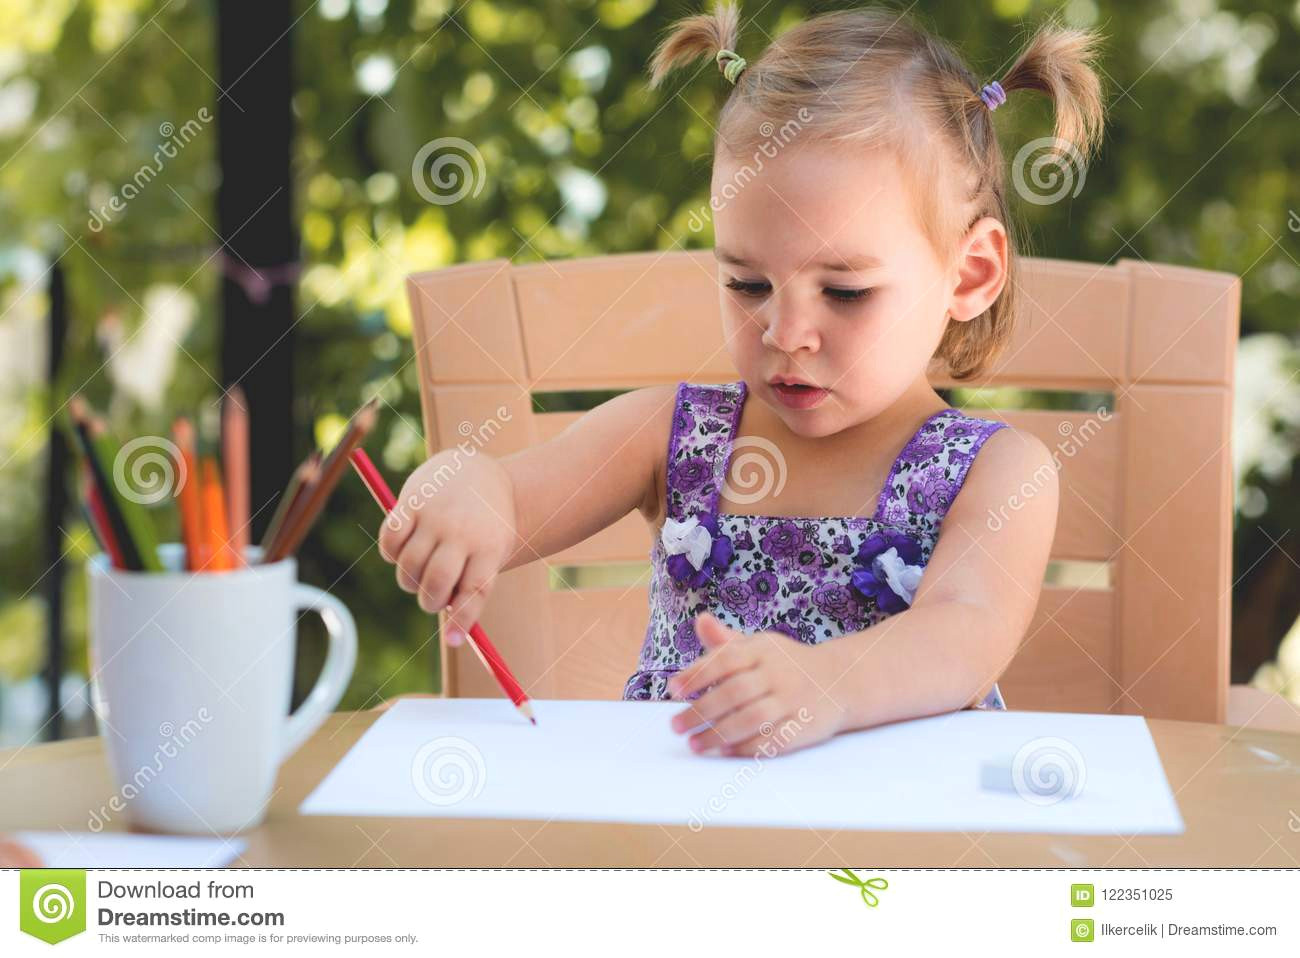 Drawing Of A Girl Sitting at A Desk Happy Smiling Baby Girl Drawing Pictures Outdoors Stock Image